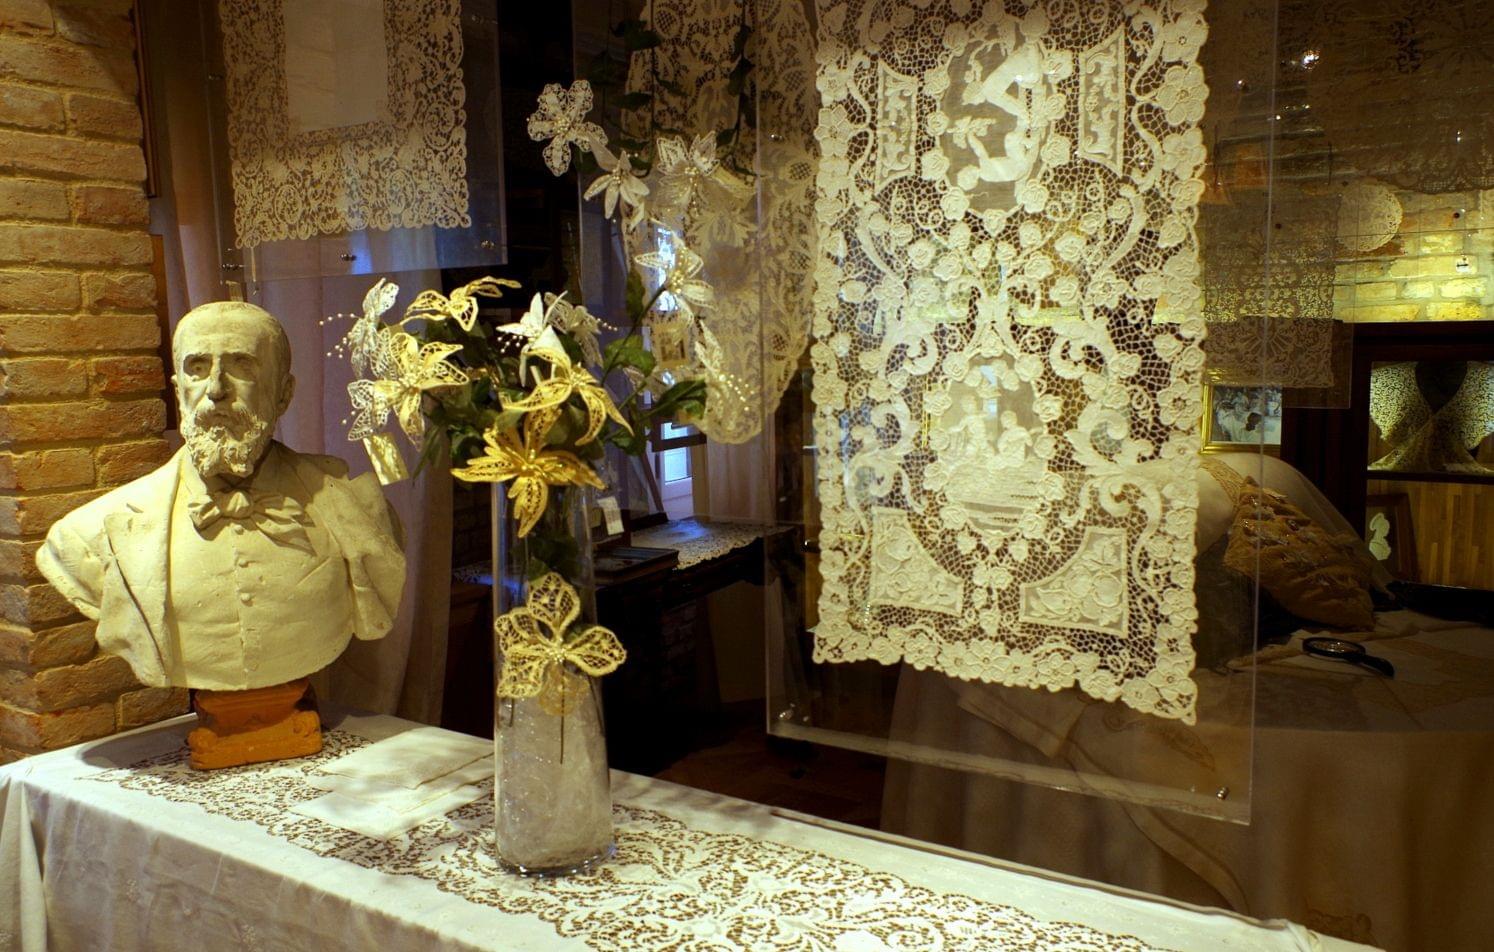 Visit Lace Museum to see it's rich collection of laces